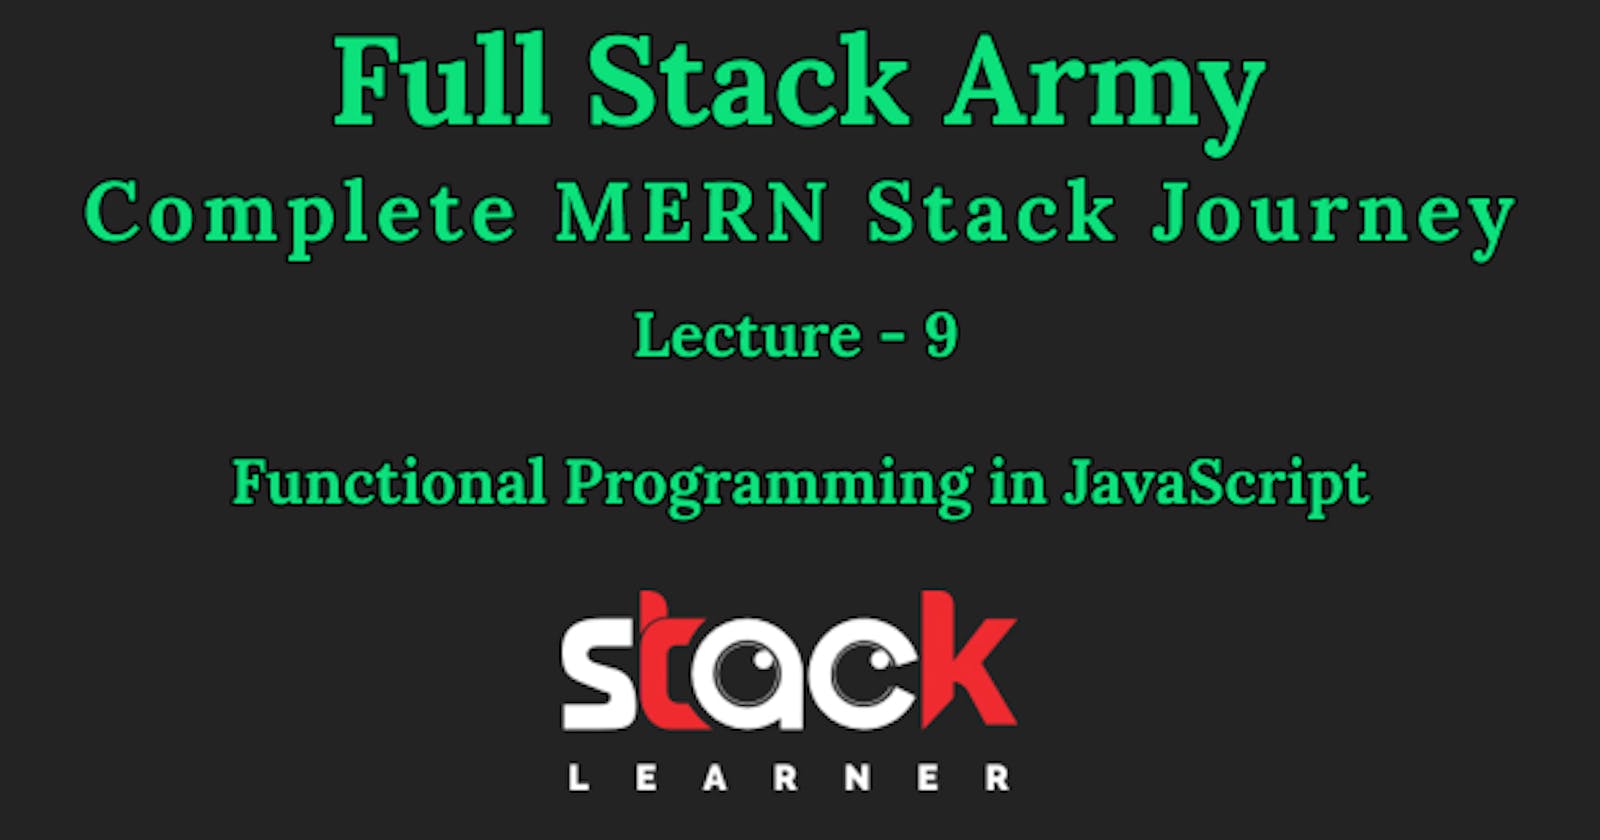 Lecture 9 - Functional Programming in JavaScript